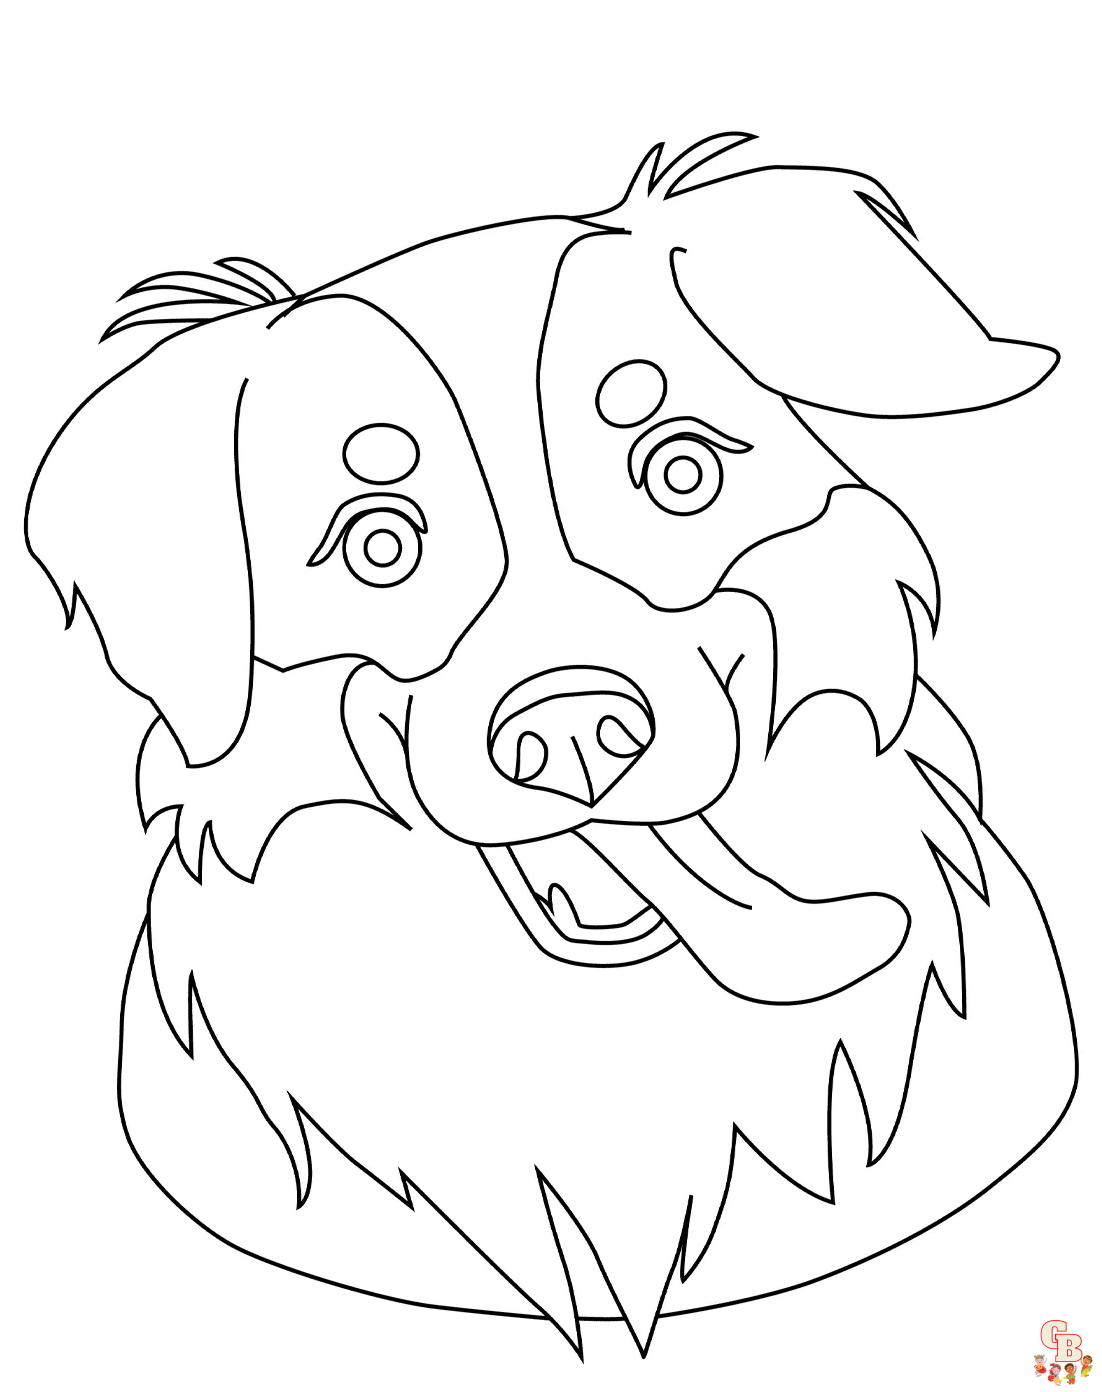 Collie Coloring Pages 3